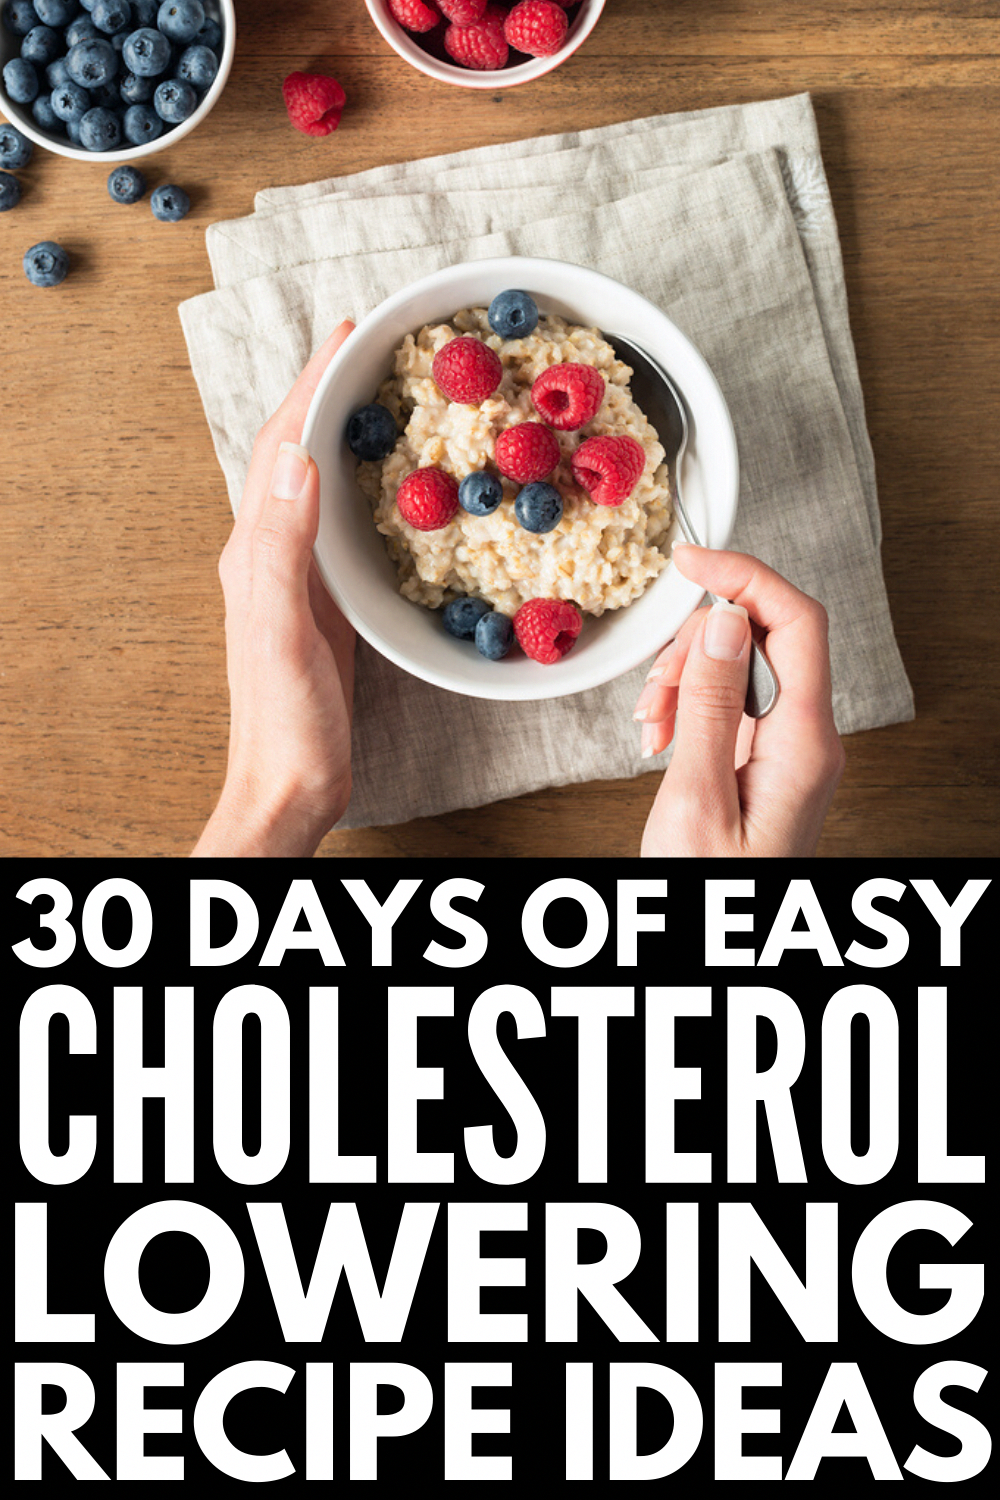 30 Days of Cholesterol Diet Recipes